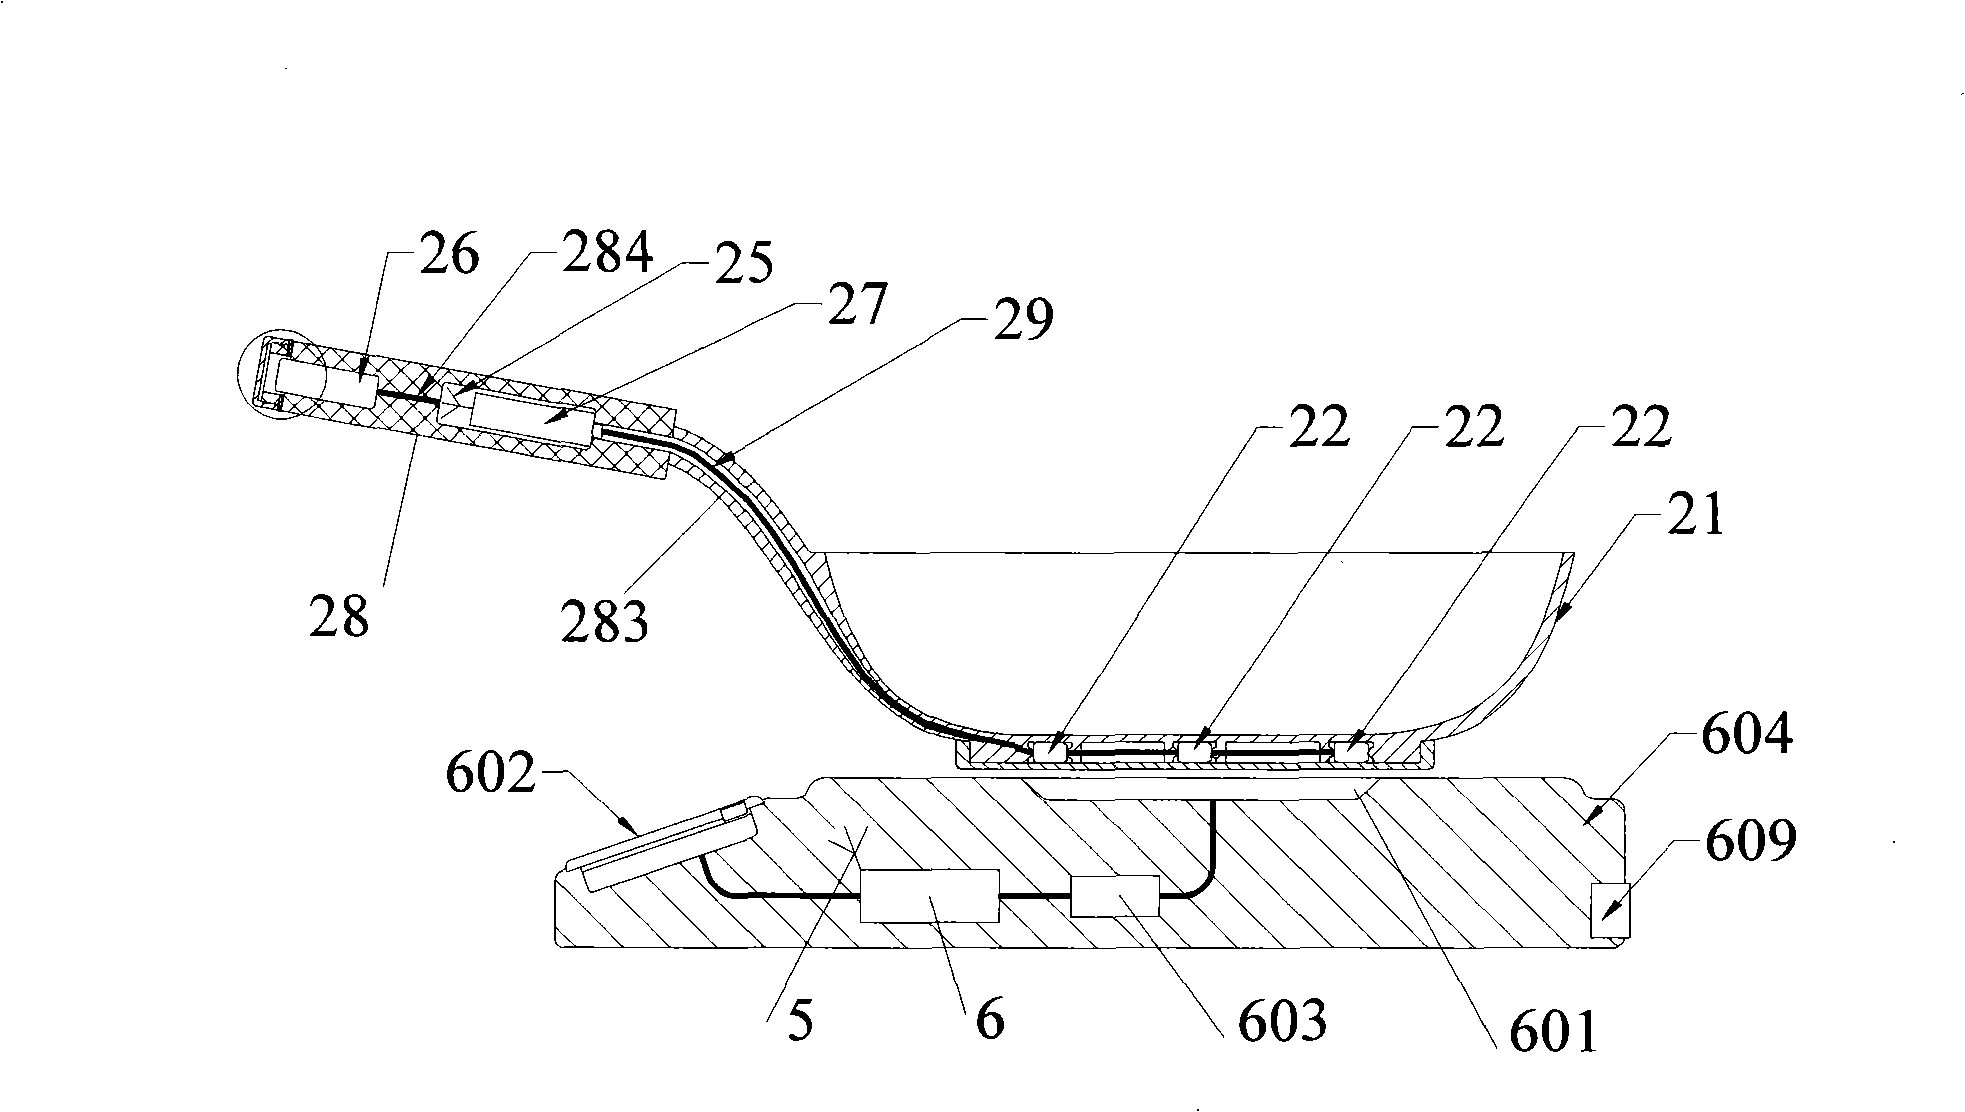 Wireless intelligent cuisine apparatus, cuisine stove and accessories, cuisine device and working method